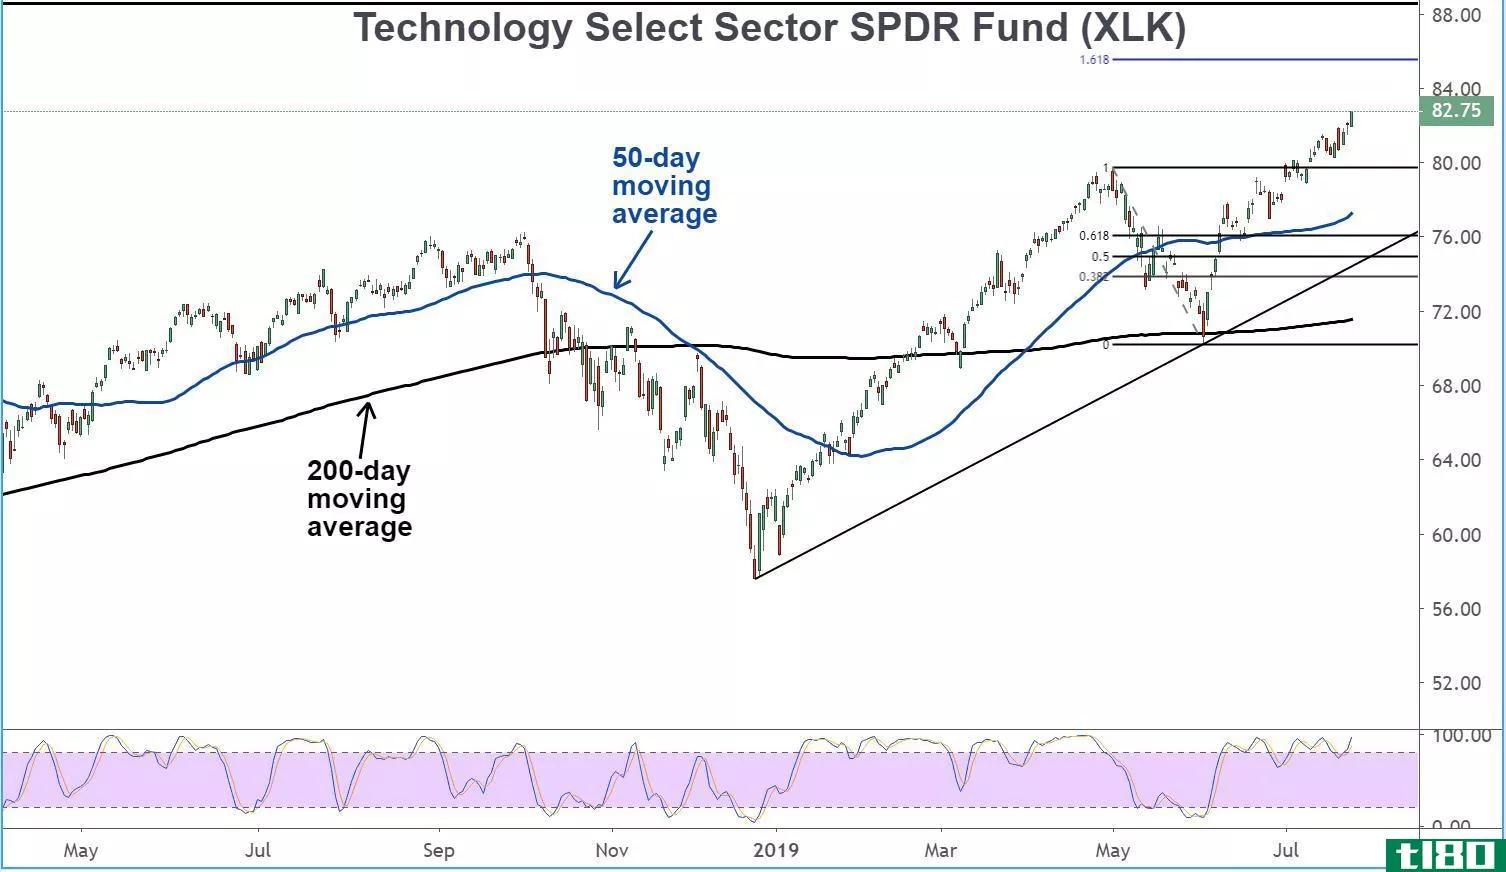 Chart showing the share price performance of the Technology Select Sector SPDR Fund (XLK)